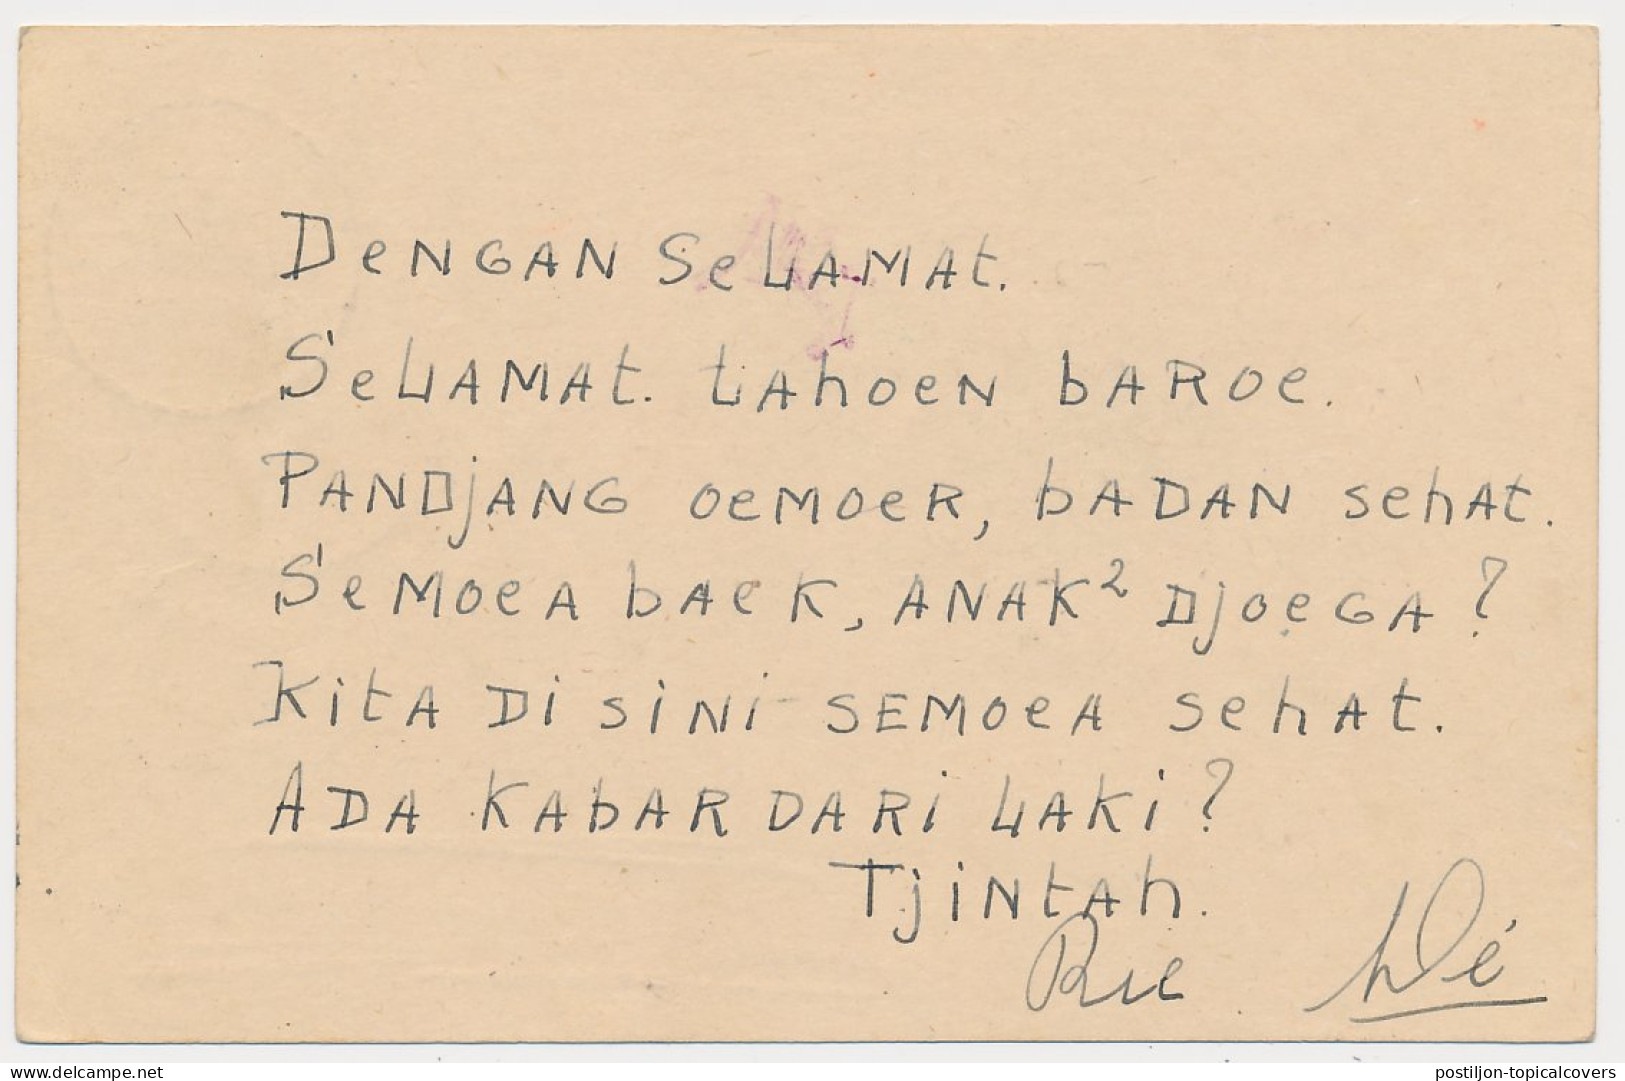 Censored Local Post Card To A Camp In Malang Neth. Indies 1944 - Netherlands Indies